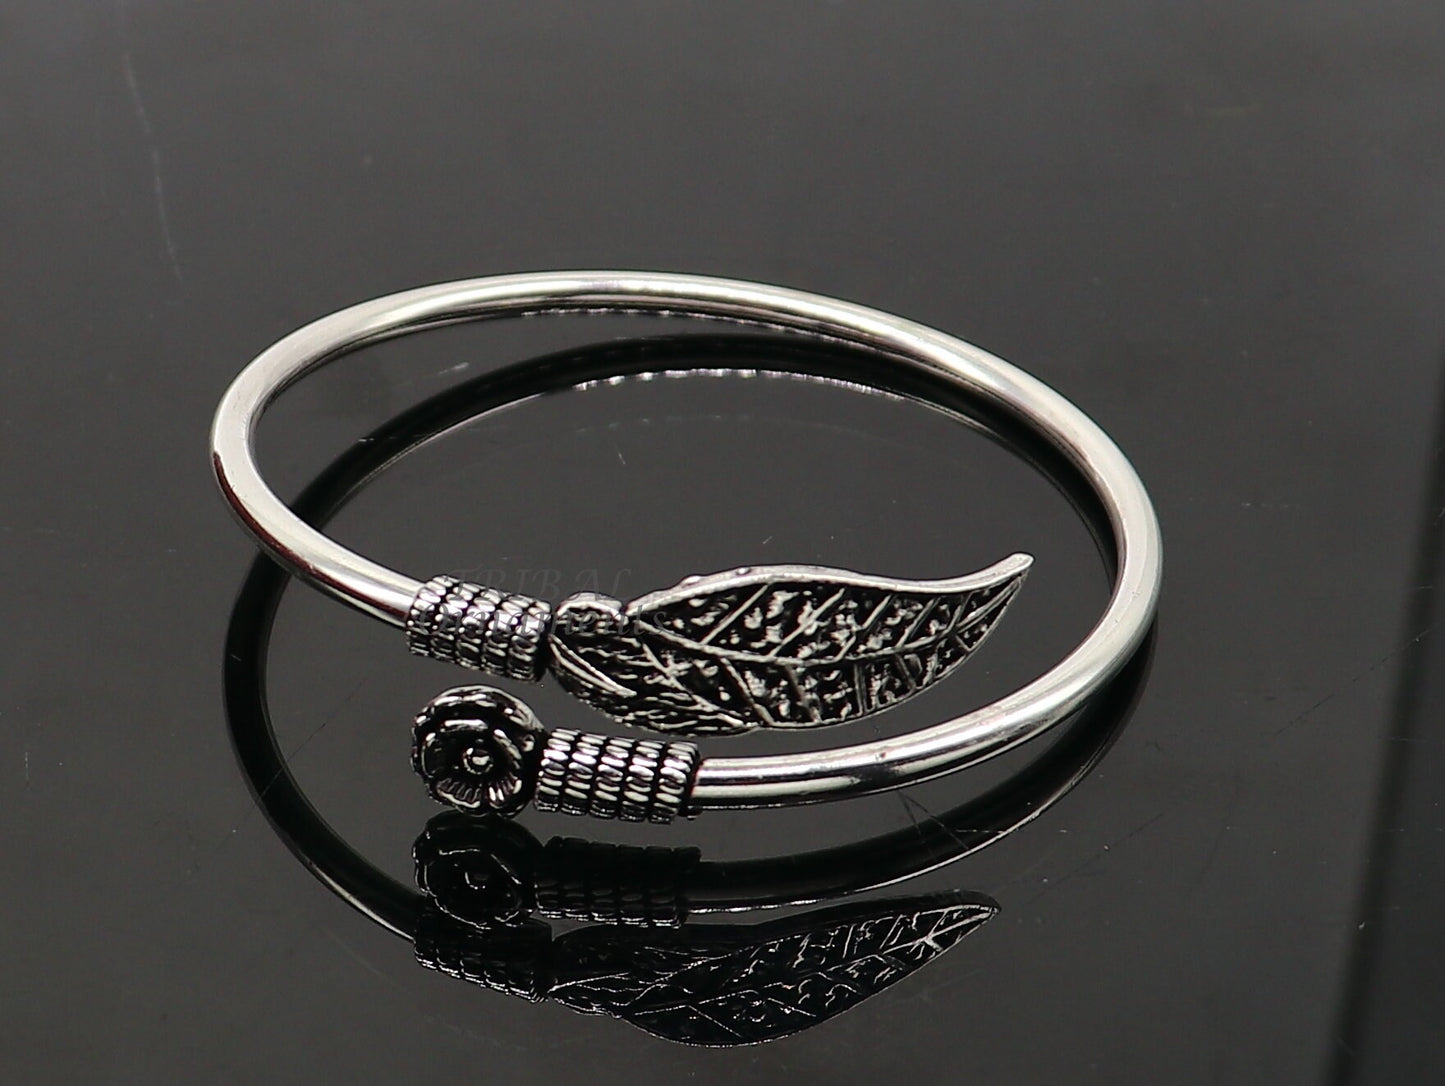 Flower and tree leaf style 925 sterling silver exclusive design handmade bangle bracelet kada for girl's women's silver jewelry nsk635 - TRIBAL ORNAMENTS